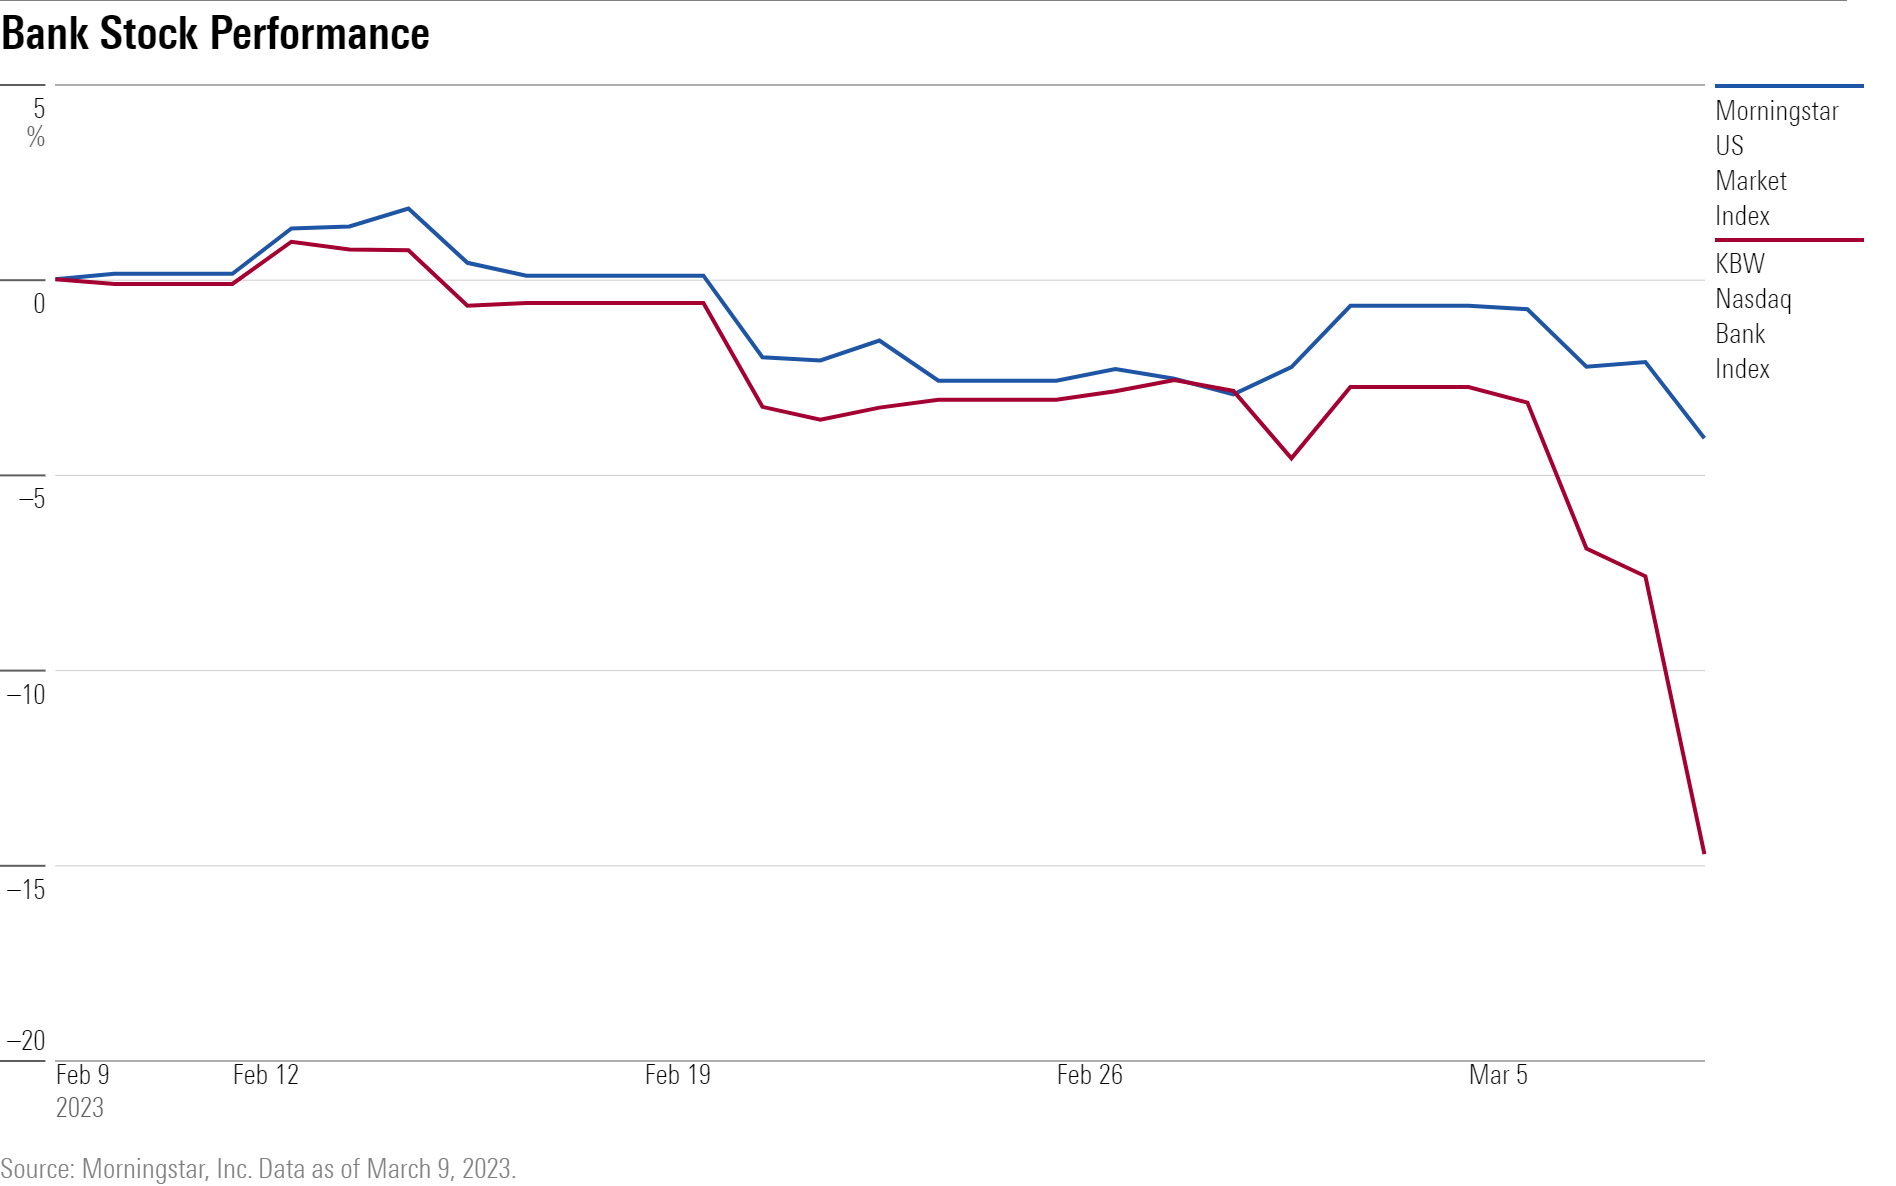 A line chart that showed the performance of the KBW Nasdaq Bank Index versus the Morningstar US Market Index.